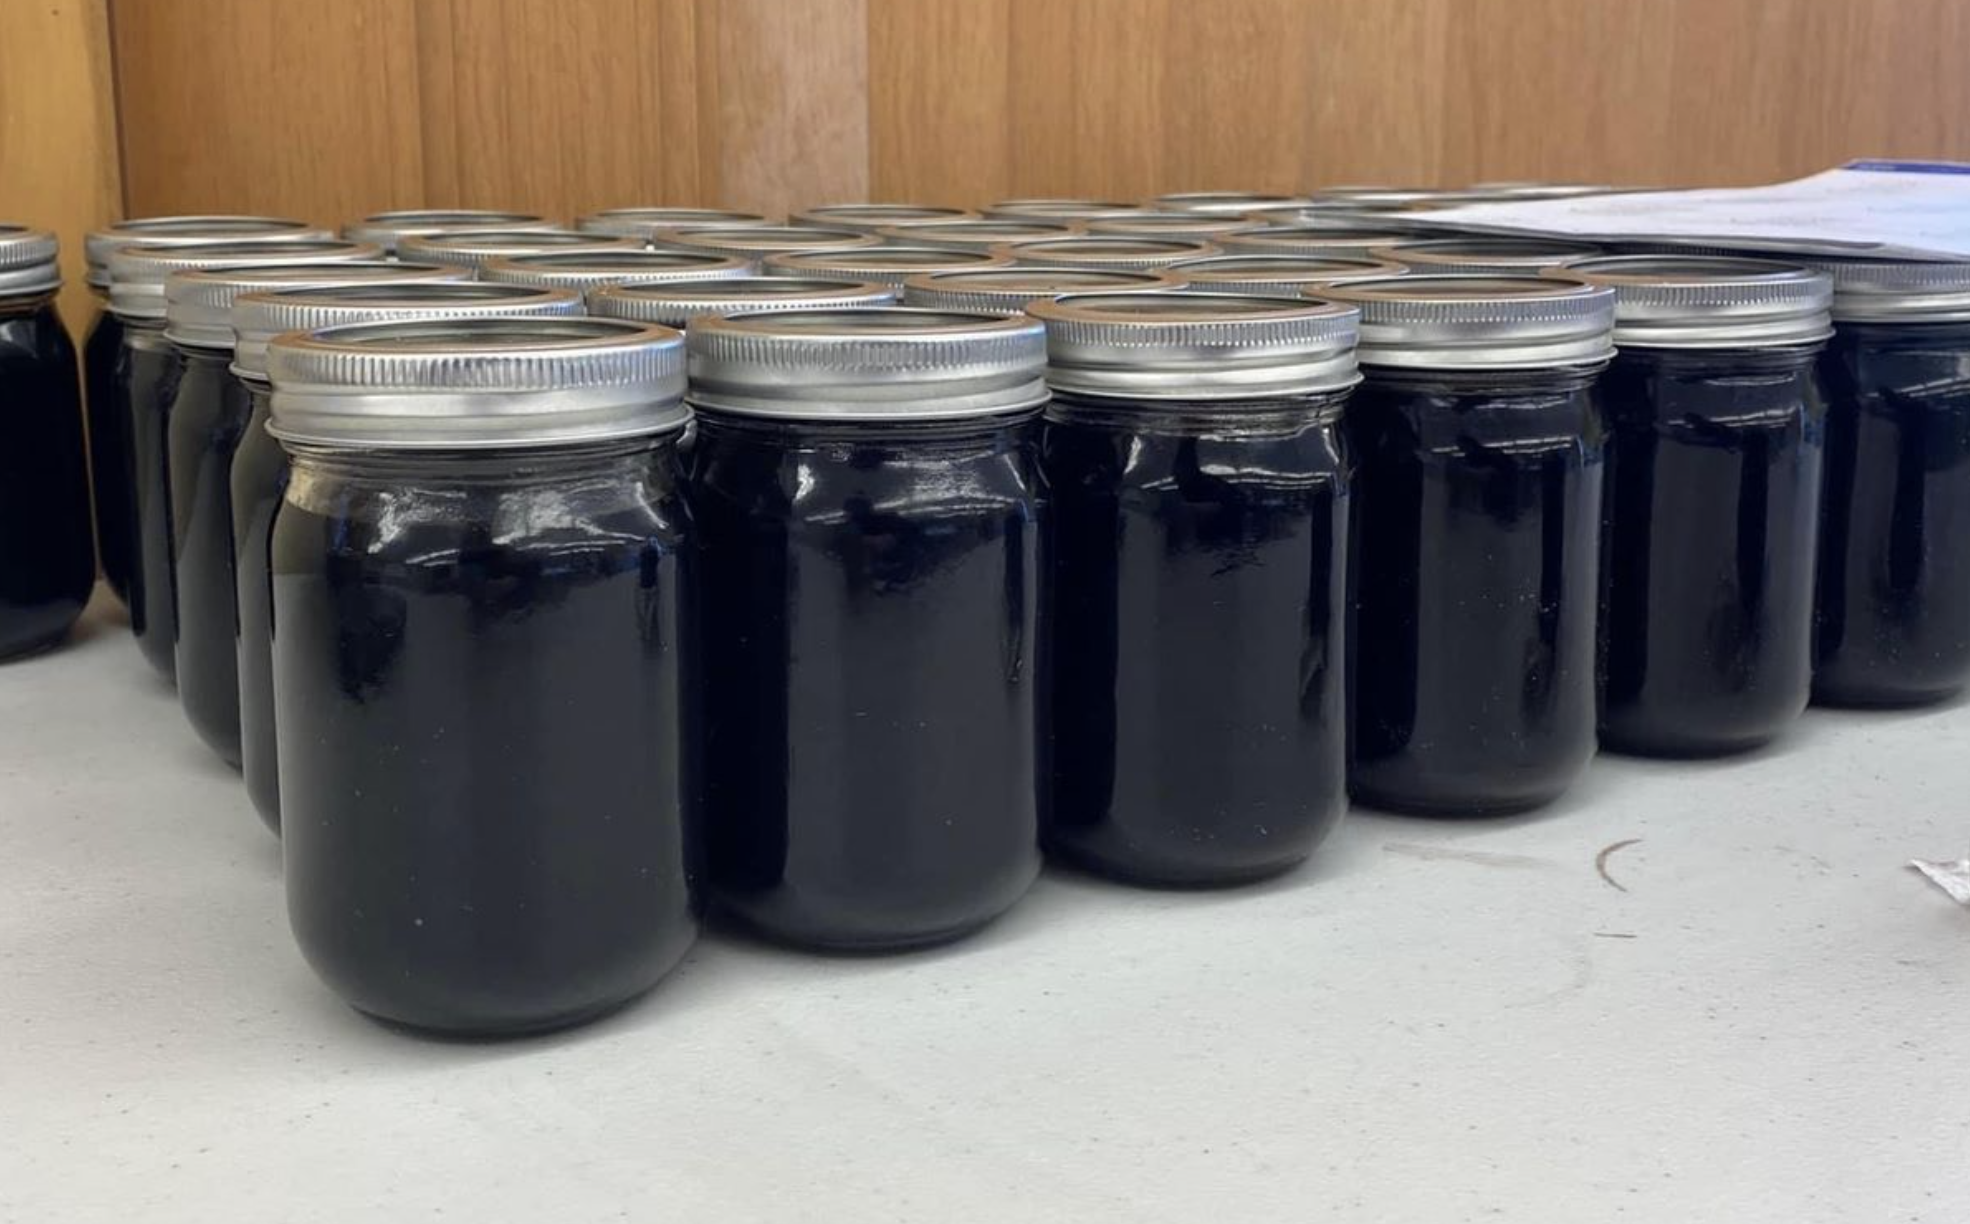 Many jars filled with liquid are lined up on a table.